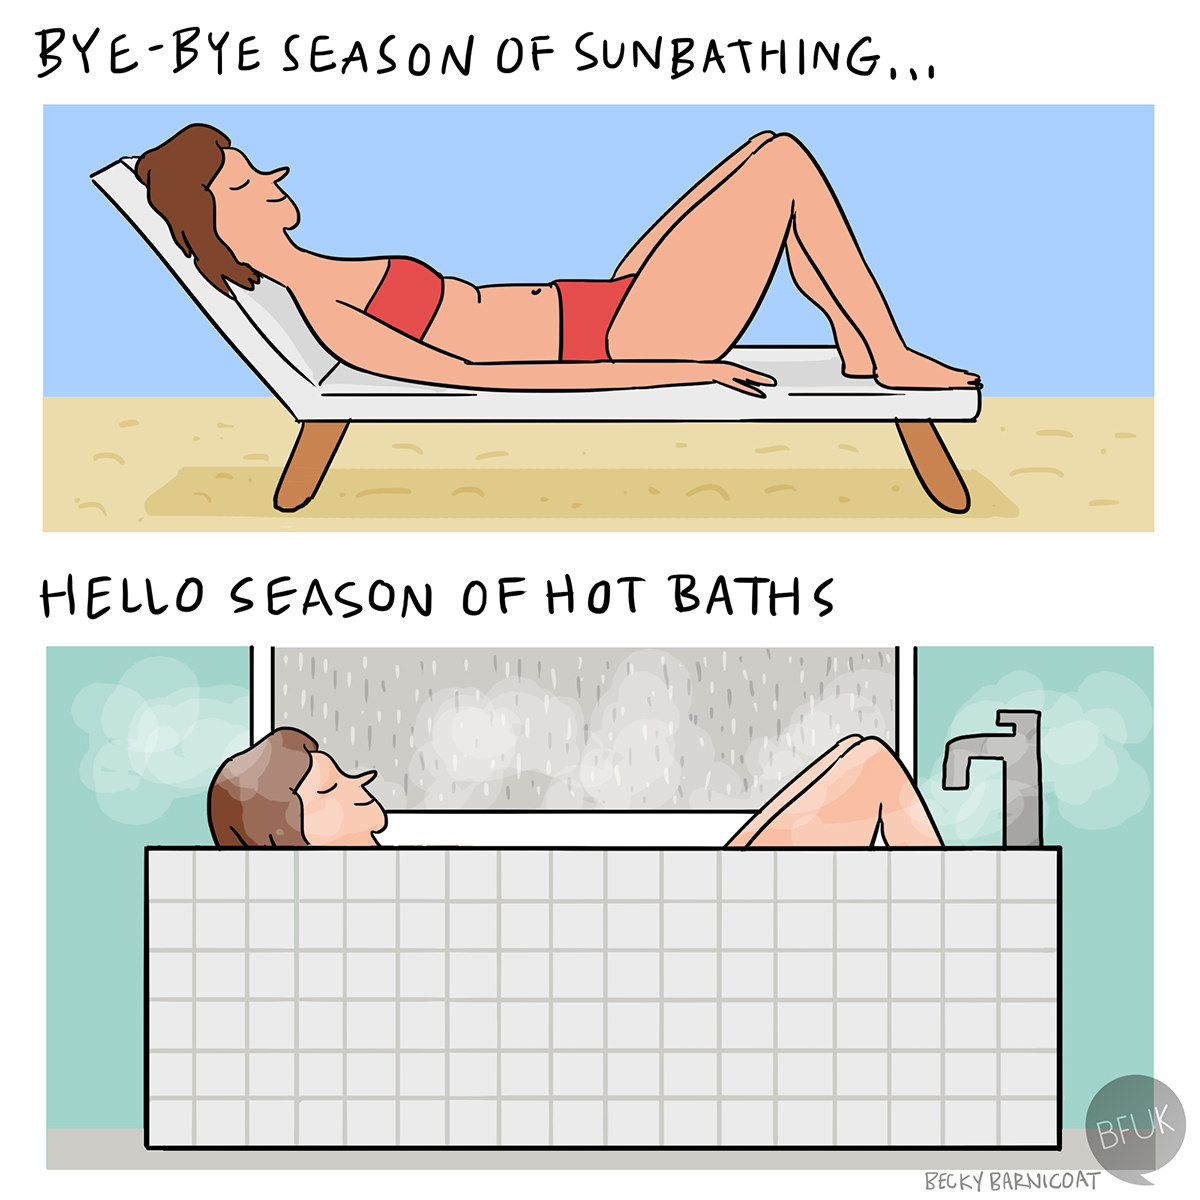 9. Sunbathing is relaxing, sure, but what about a steaming hot bath? 